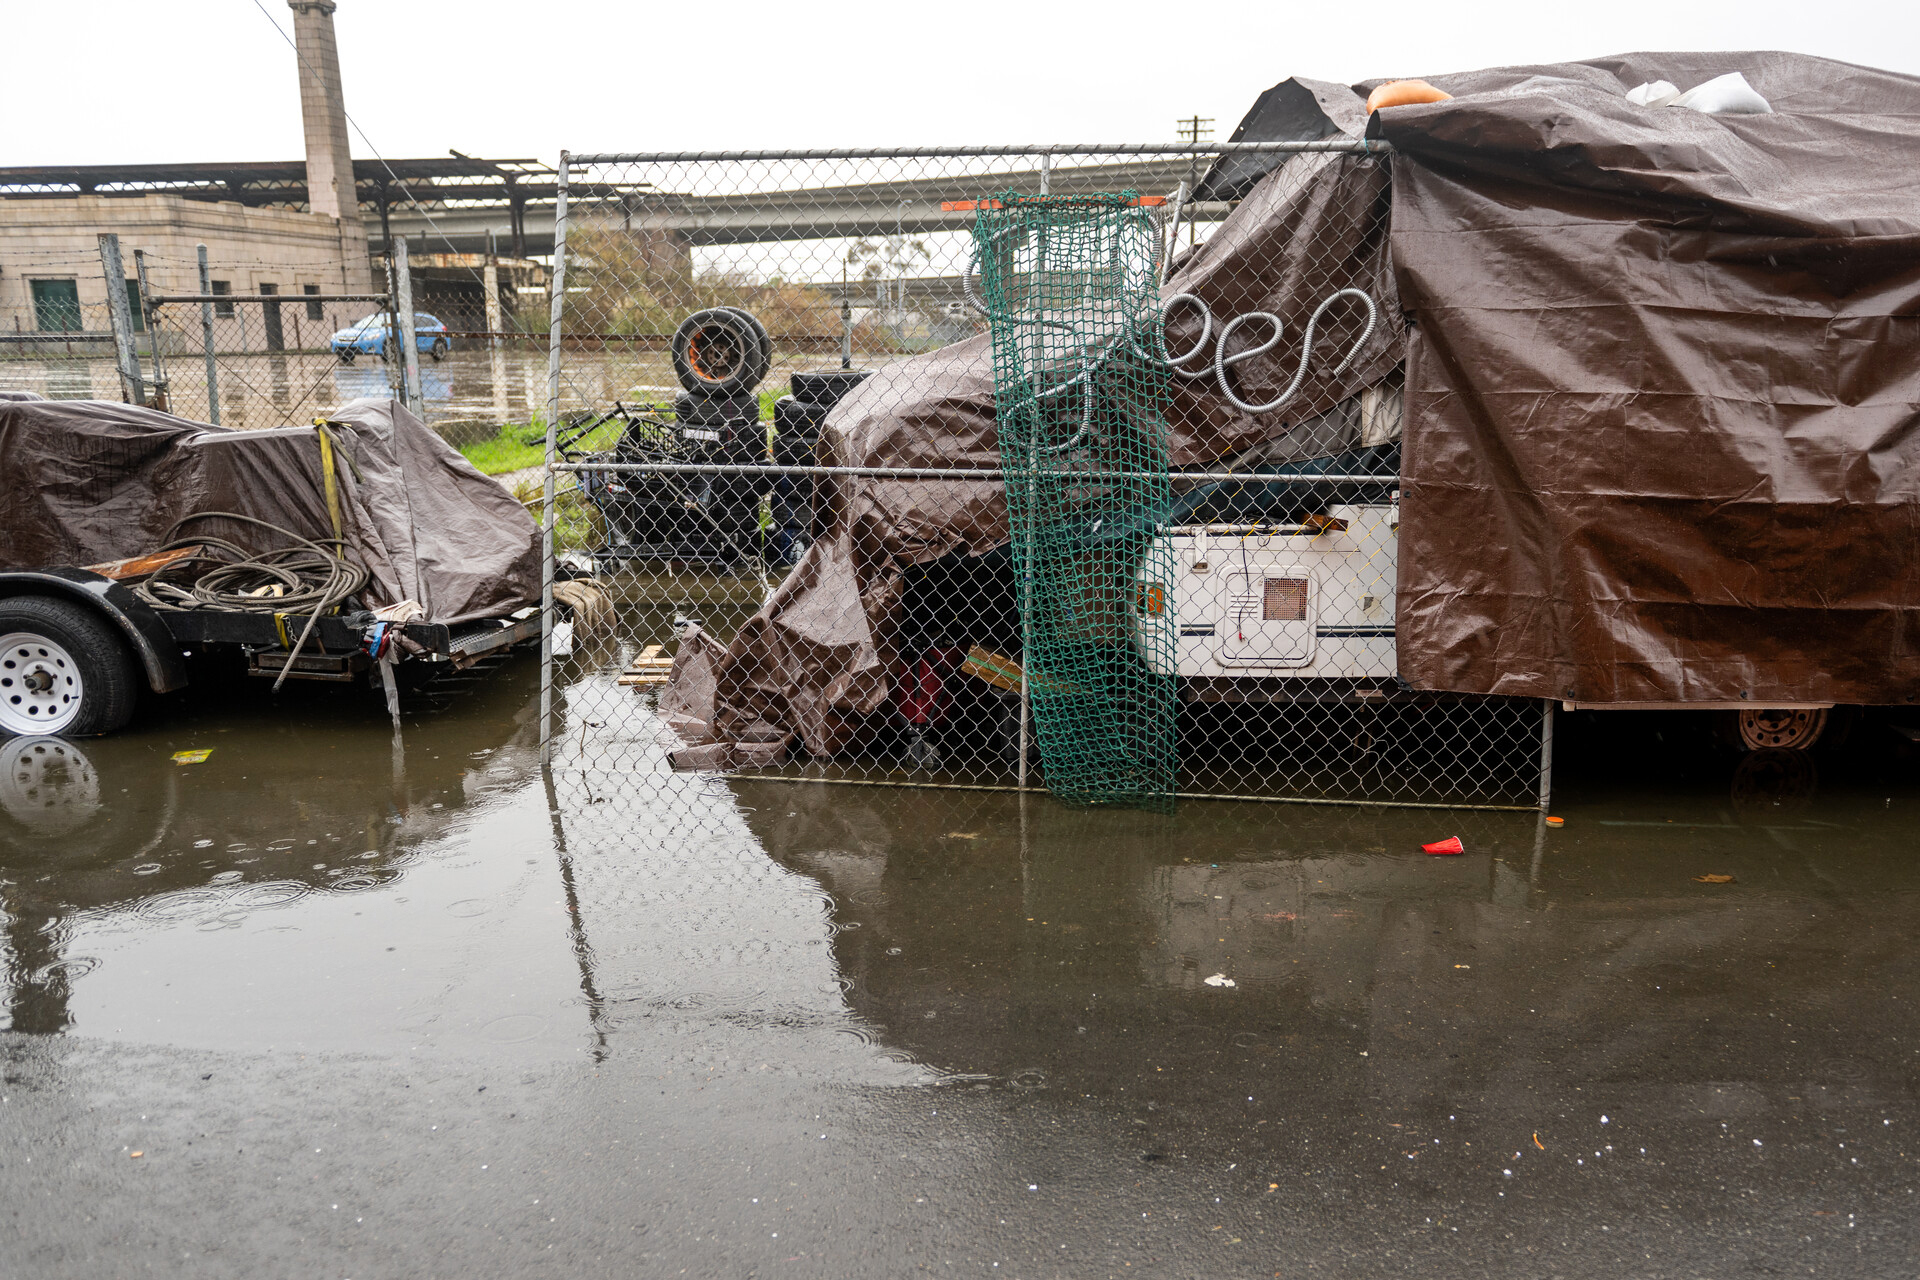 An outdoor shot of an unhoused person's encampment site. A white trailer is covered in brown tarps as pools of water start to form in front of the place. Piles of abandoned tires are in the background amid a gray sky.